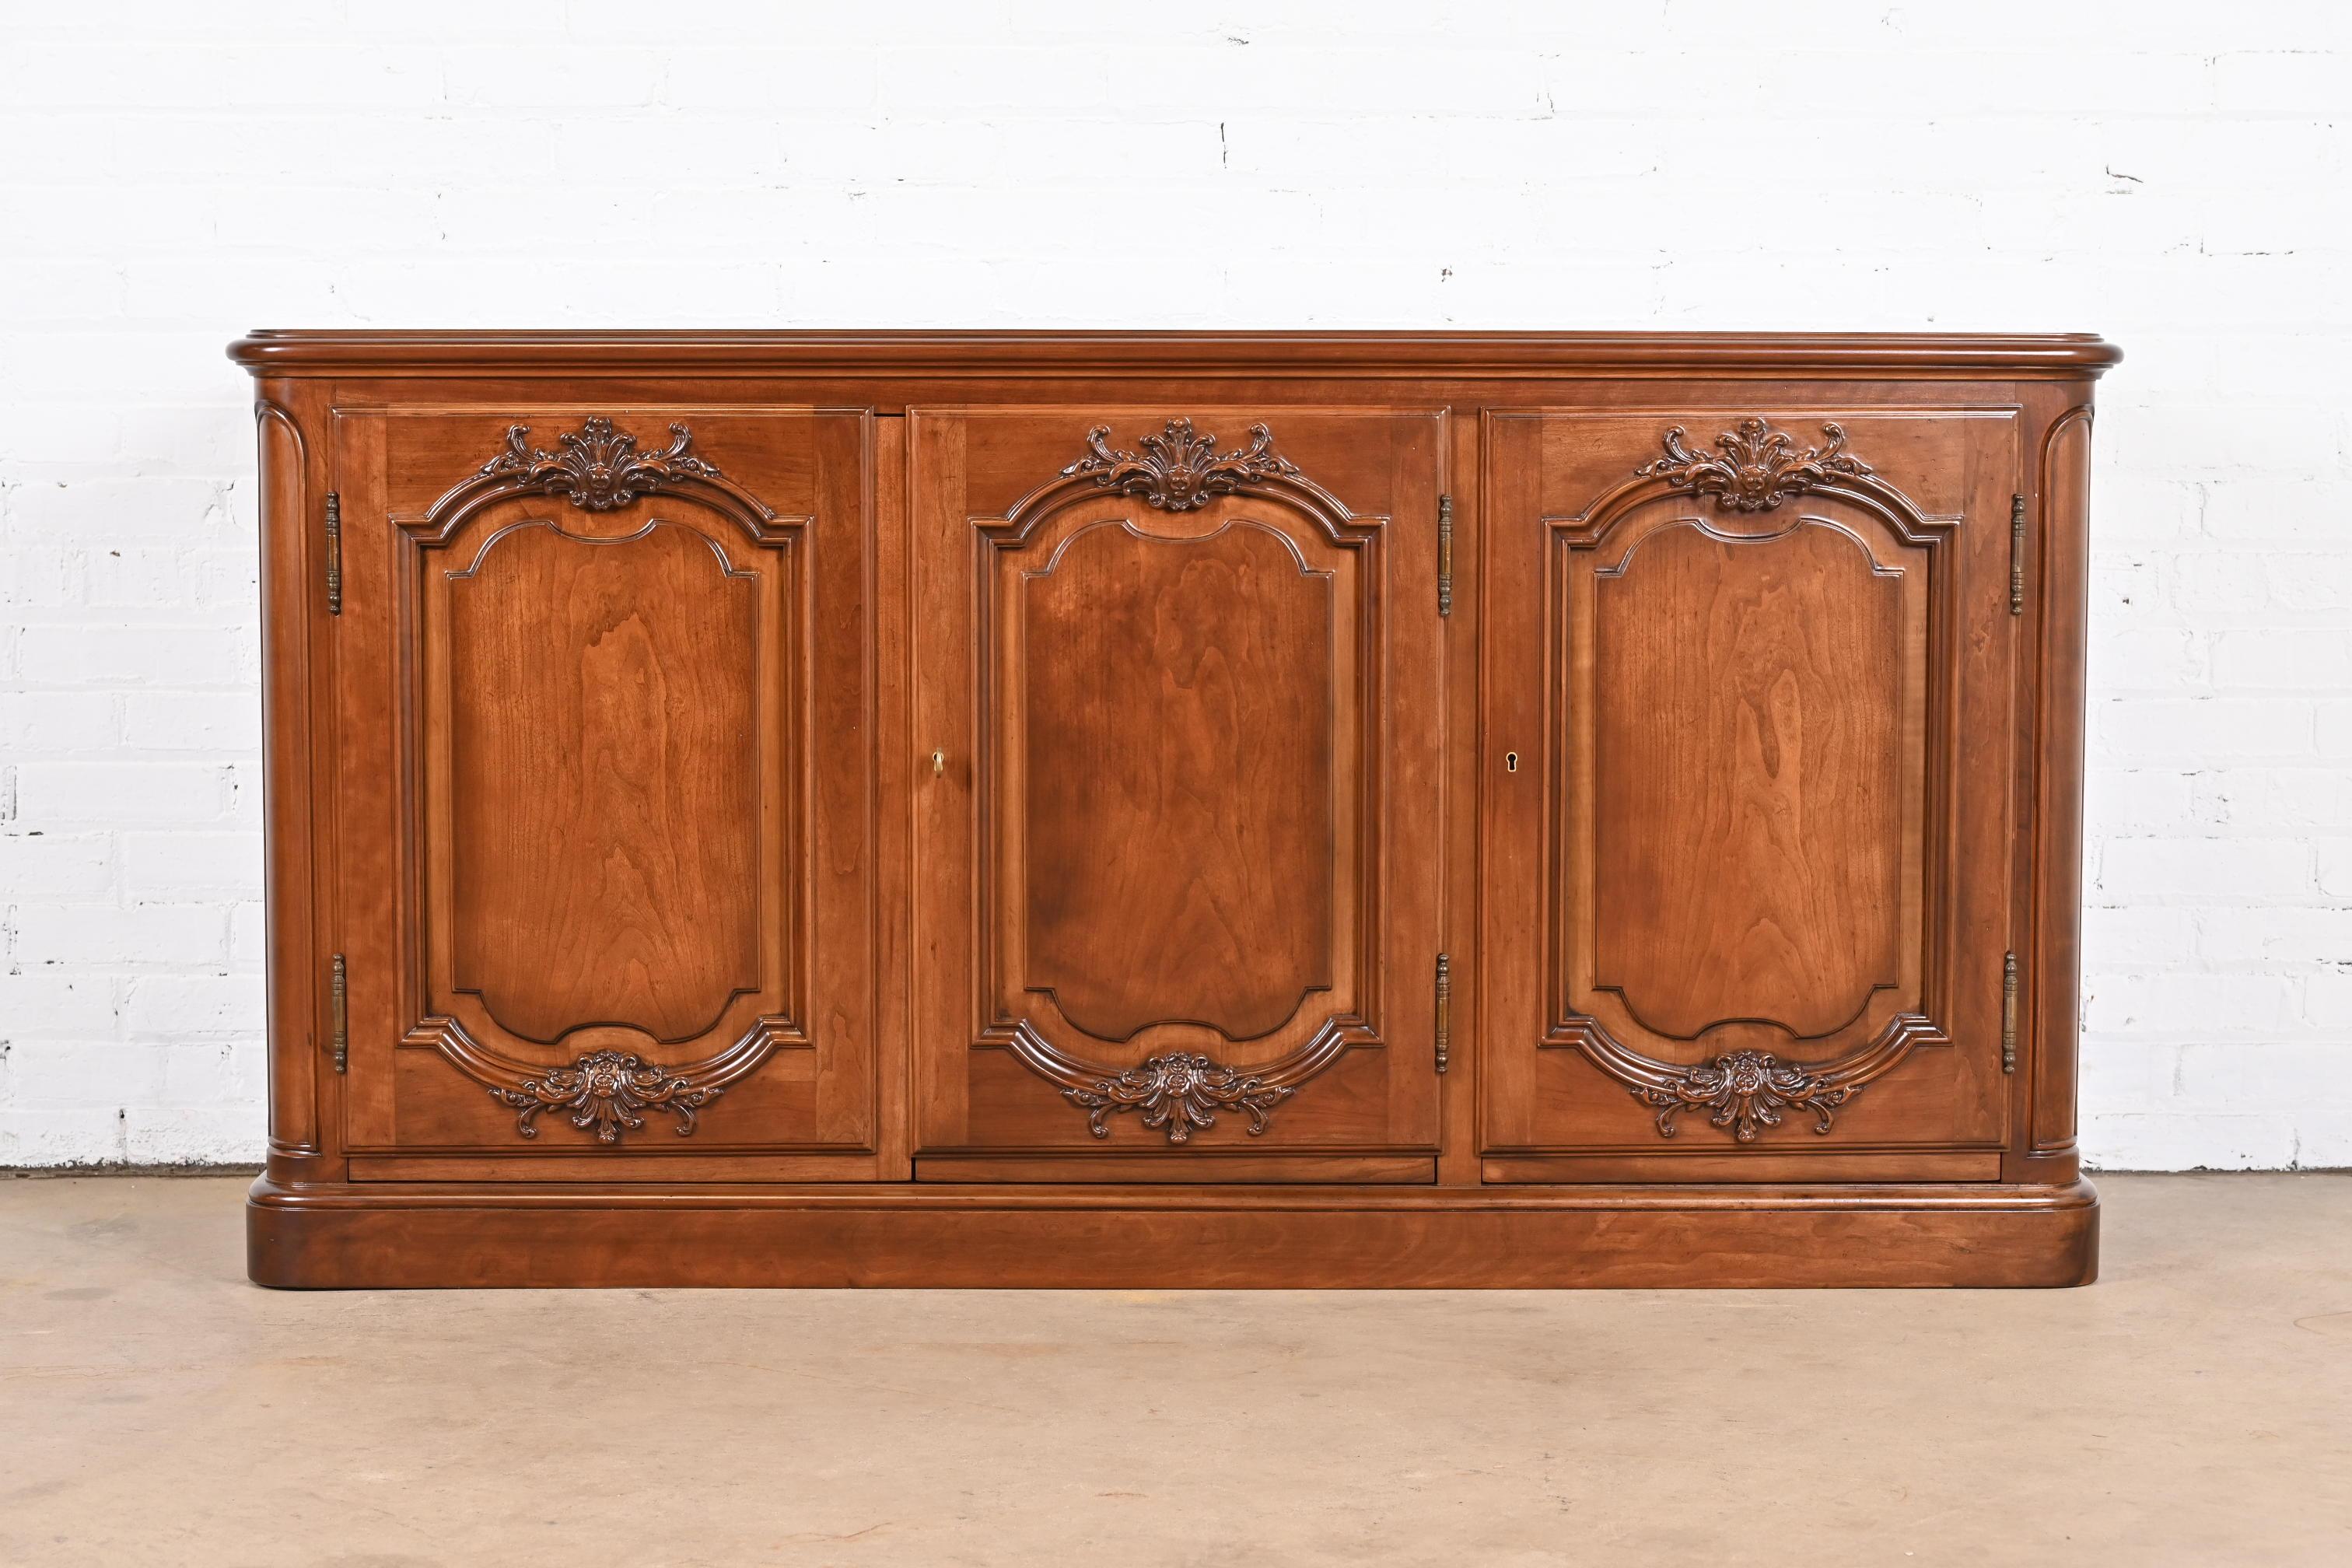 French Provincial Baker Furniture French Country Cherry Wood Sideboard Credenza, Newly Refinished